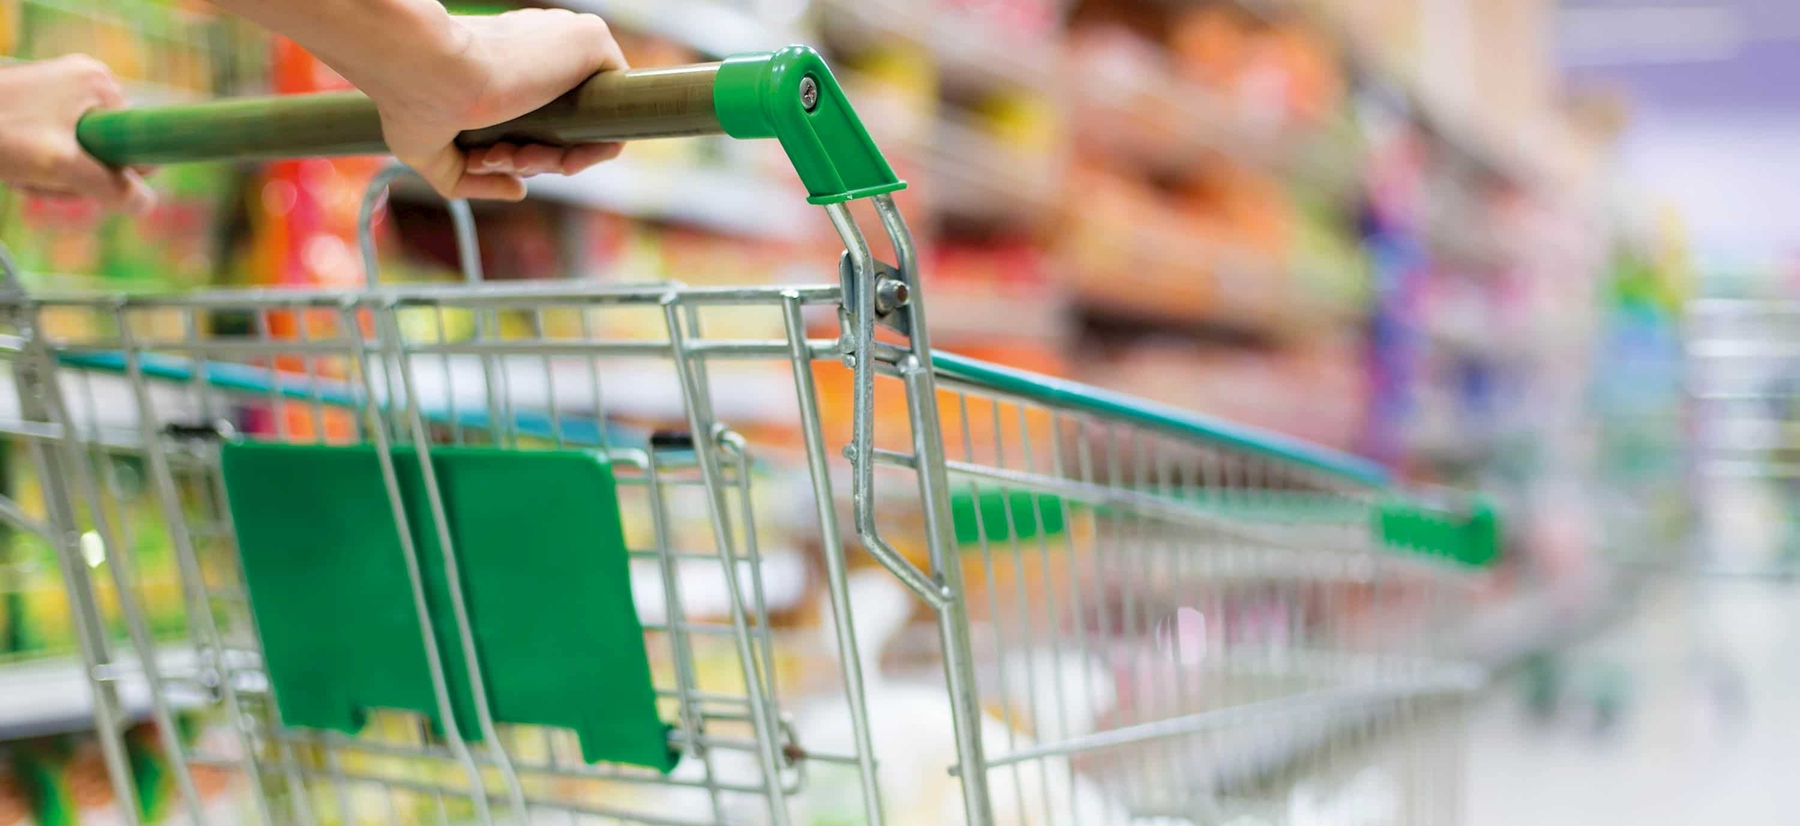 Shopping trolleys in the supermarket as a symbol for retail logistics